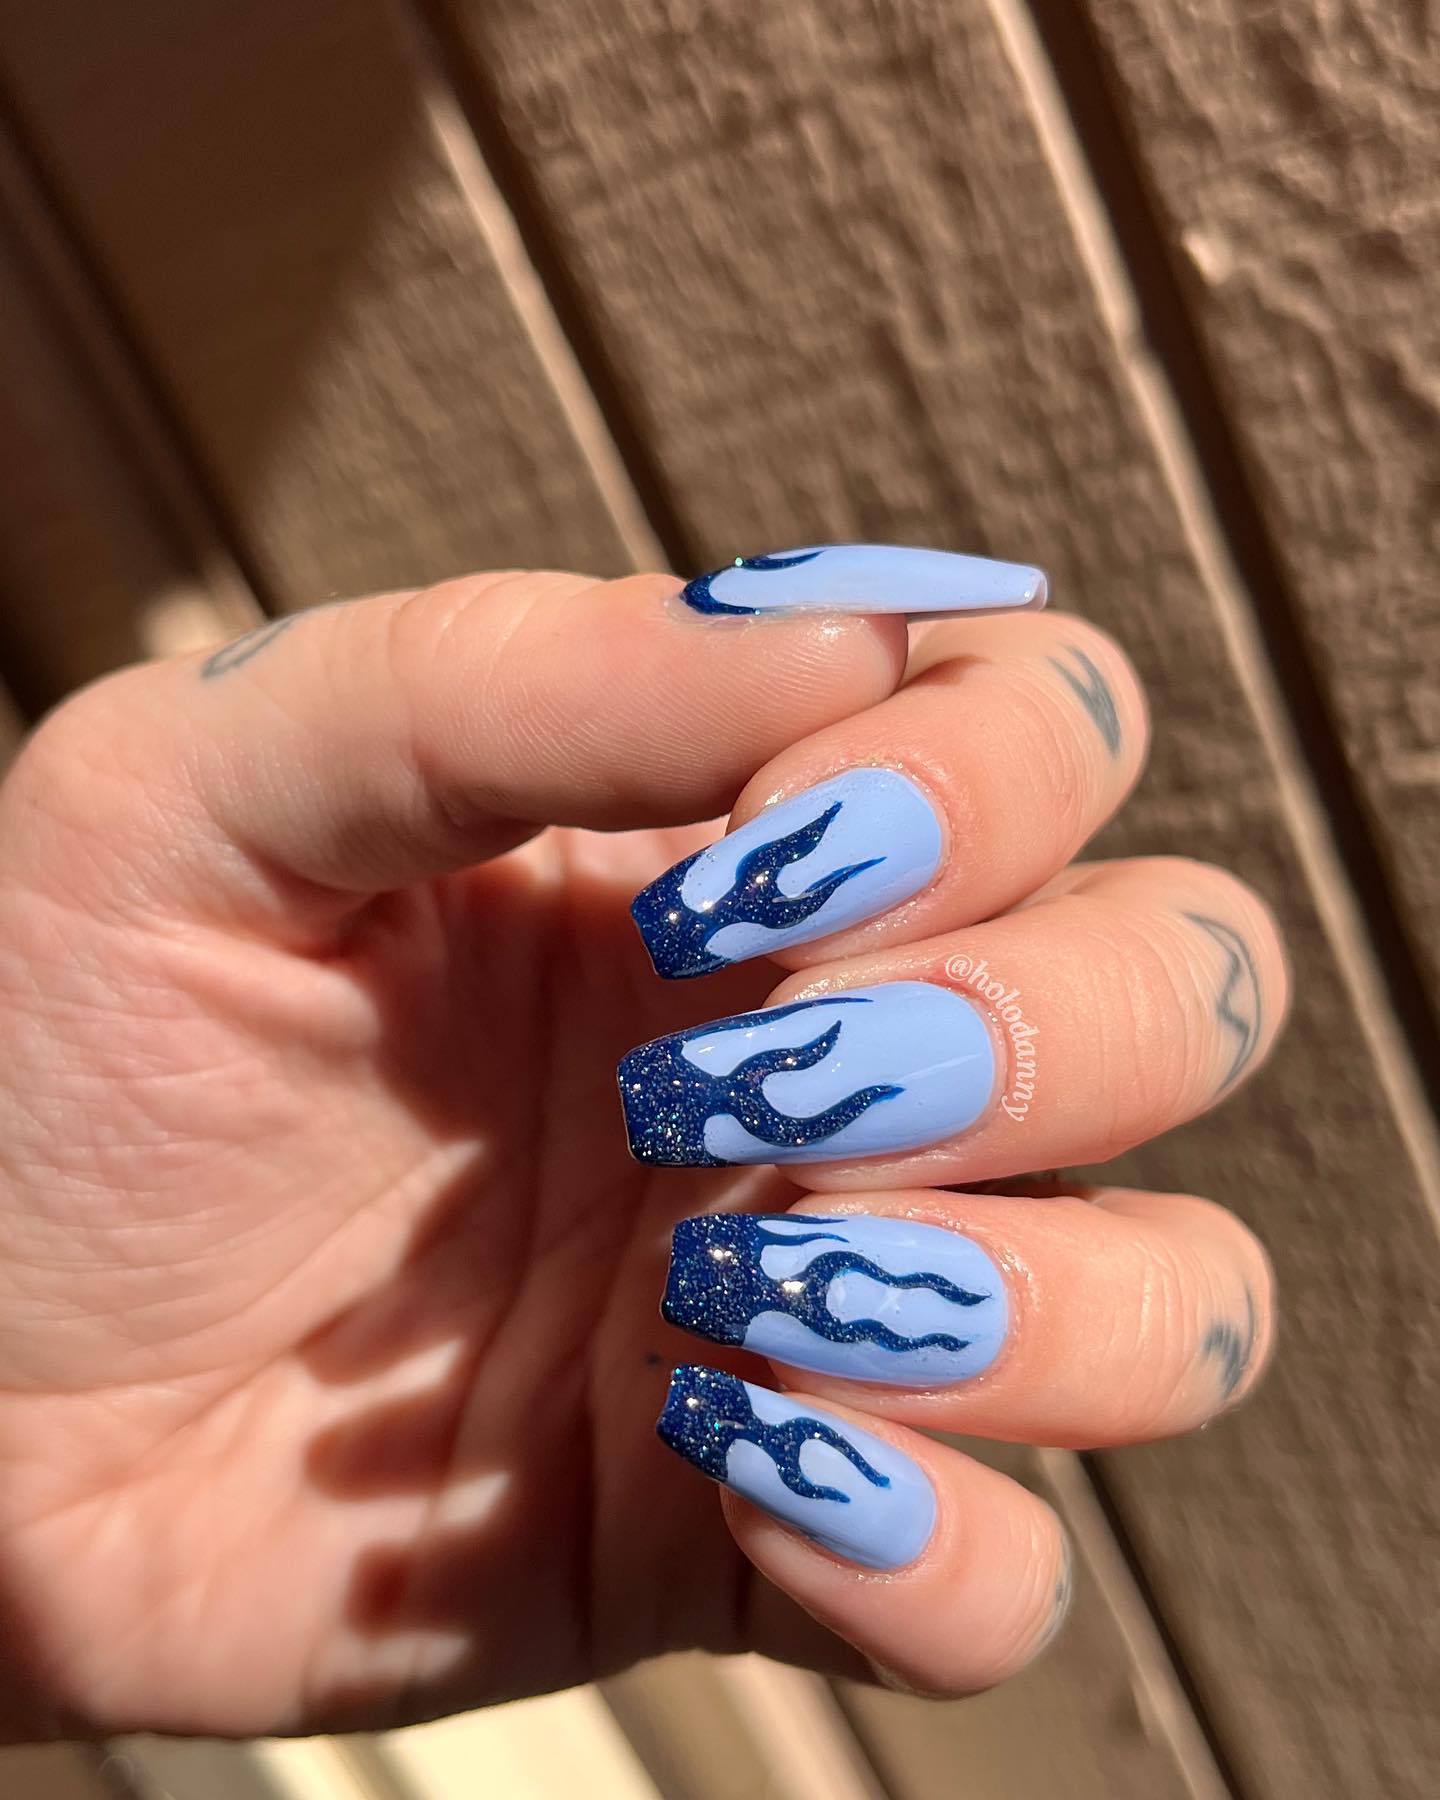 Blue is a color of the ocean and the sky and this makes it a great color to wear on your nails. To feel the blue vibes to the fullest, let's apply a baby blue nail polish and get dark blue glittered flame nail art to shine.